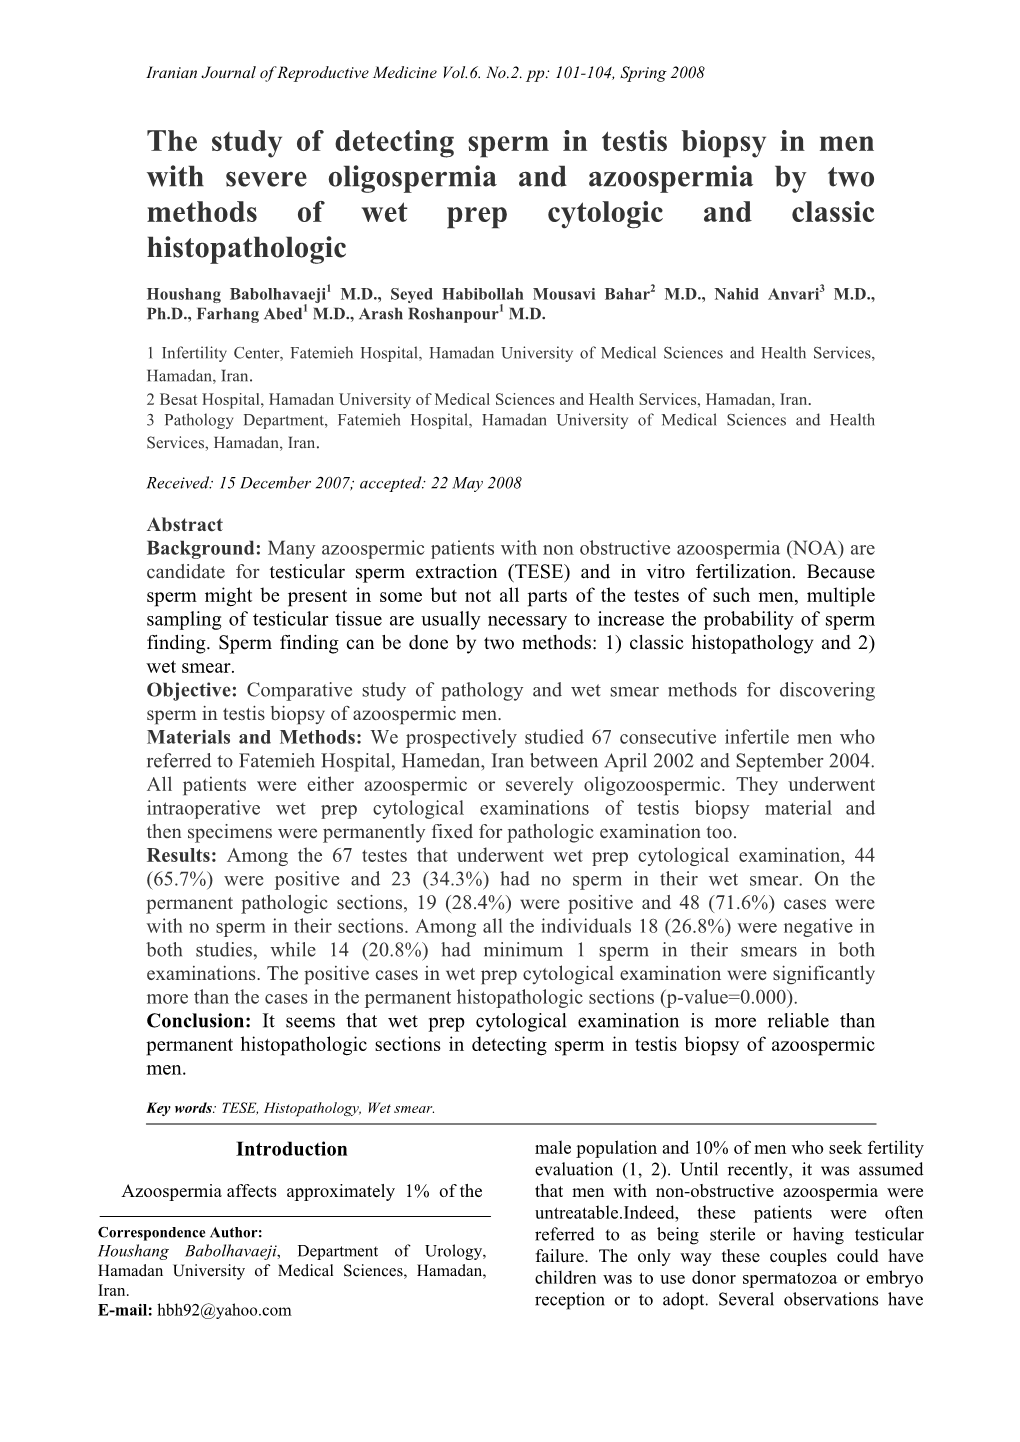 The Study of Detecting Sperm in Testis Biopsy in Men with Severe Oligospermia and Azoospermia by Two Methods of Wet Prep Cytologic and Classic Histopathologic